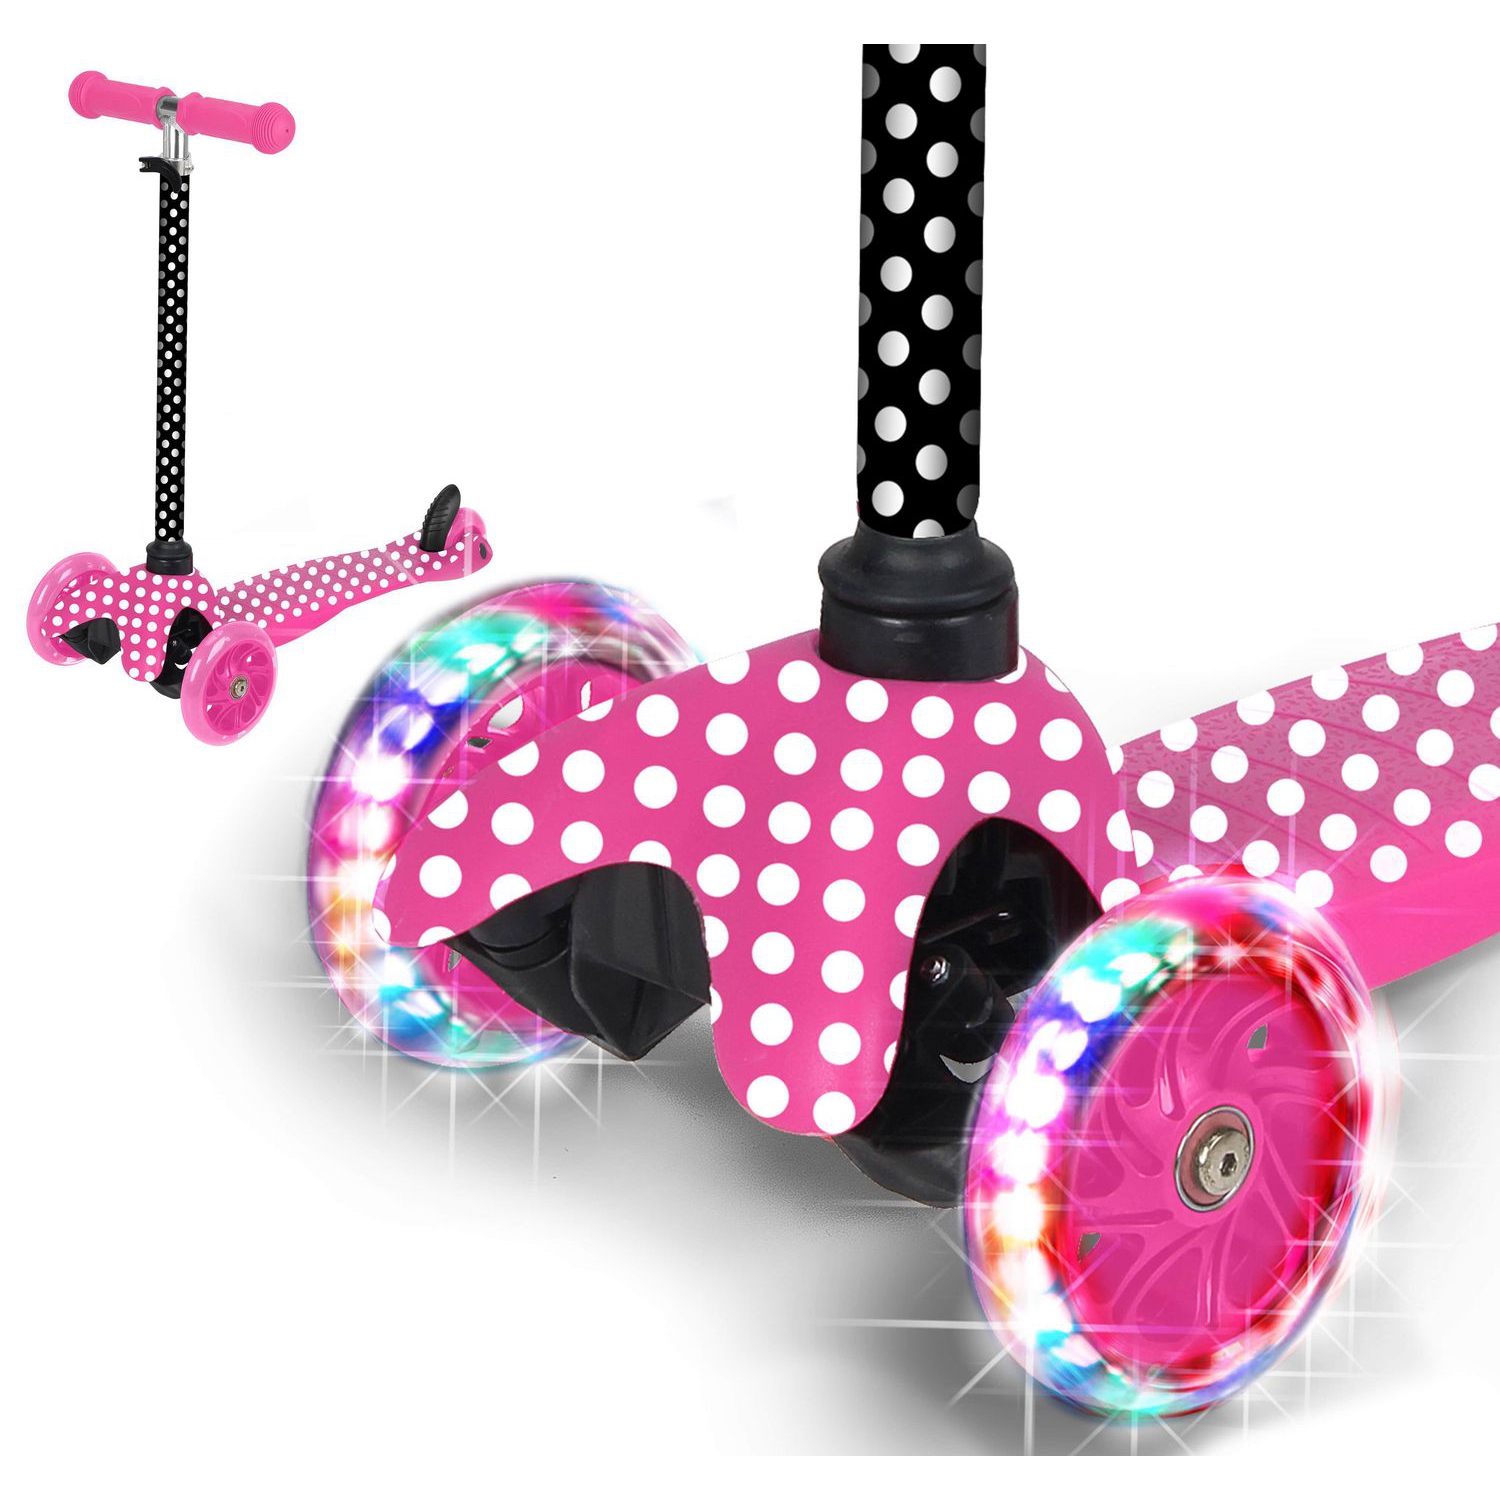 Rugged Racer Mini Deluxe 3-Wheel Scooter with LED Lights and Pink Polka Dot Design